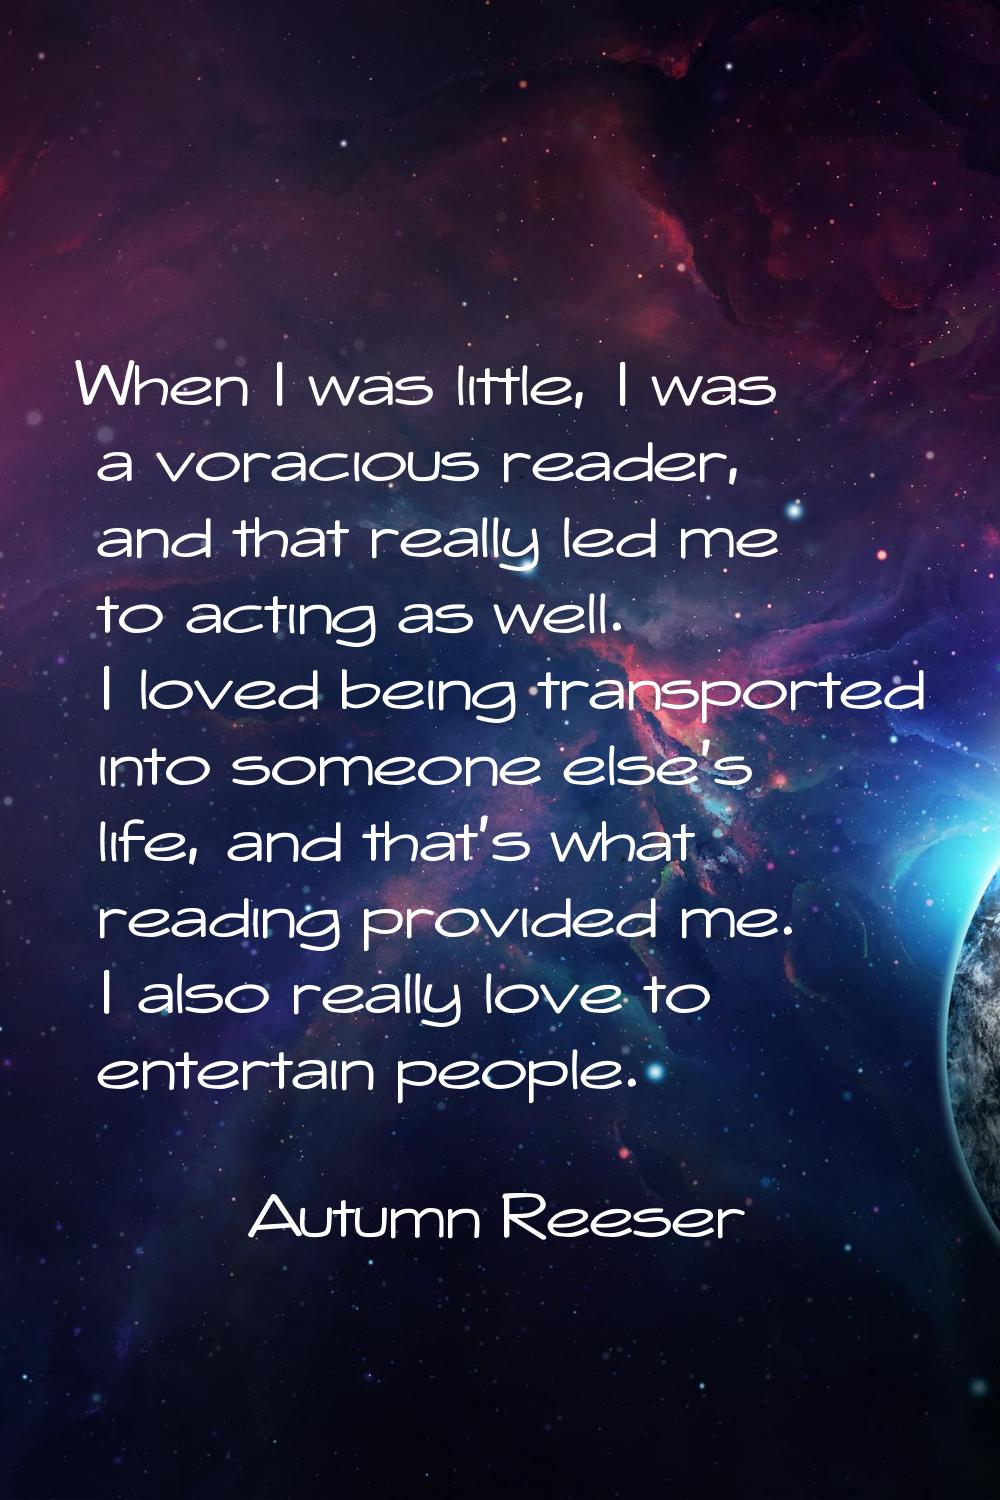 When I was little, I was a voracious reader, and that really led me to acting as well. I loved bein